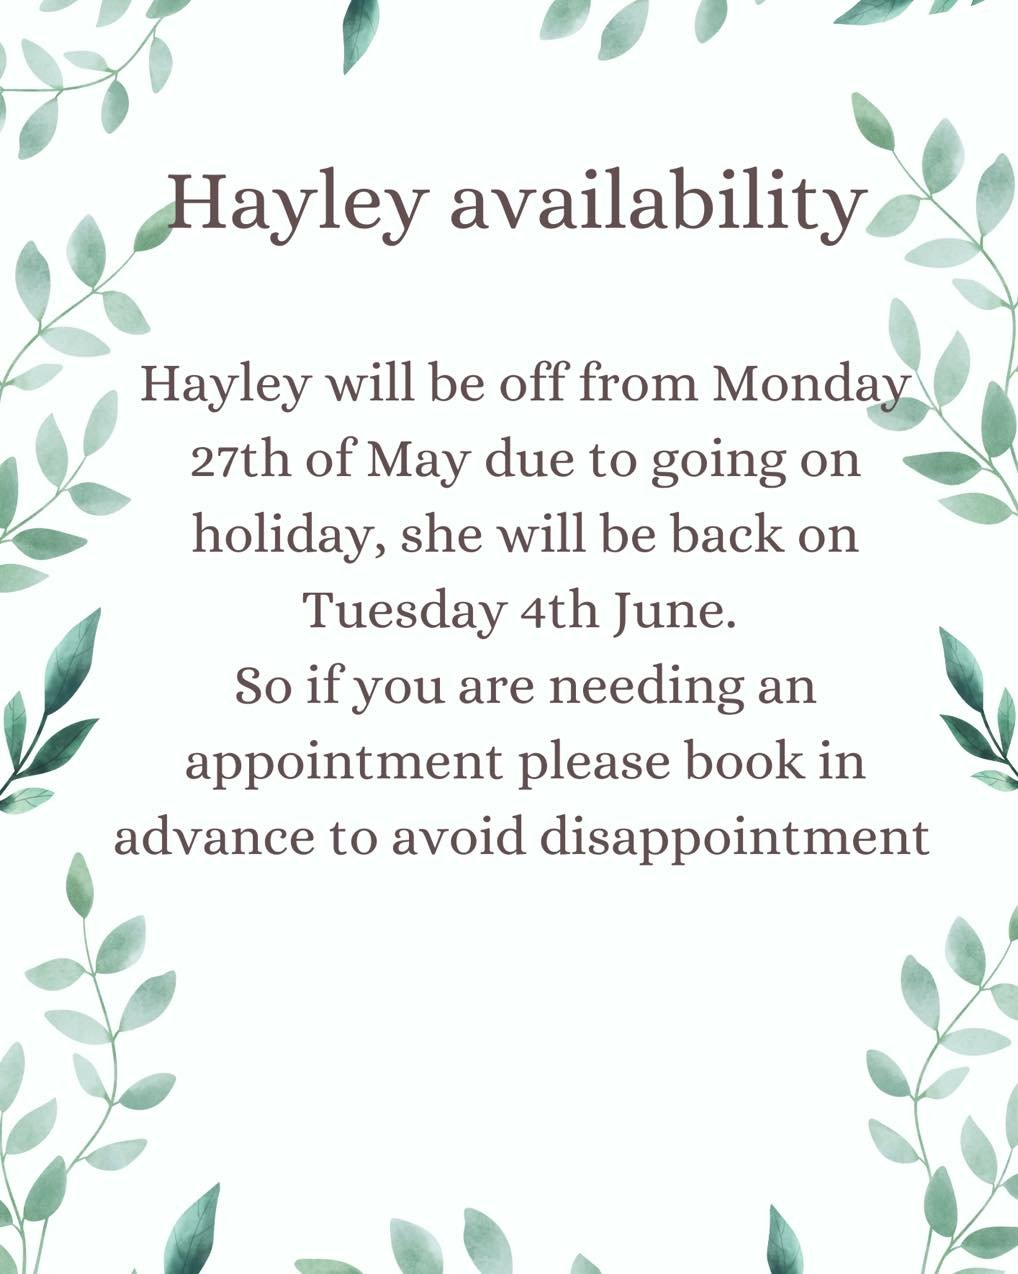 Hayley&rsquo;s availability 
She will be off from the 27th of May till the 4th June as she will be going on holiday.
If you are needing appointments with her we encourage you to book in advance to avoid any disappointment. 
Thank you 

#beautyretreat